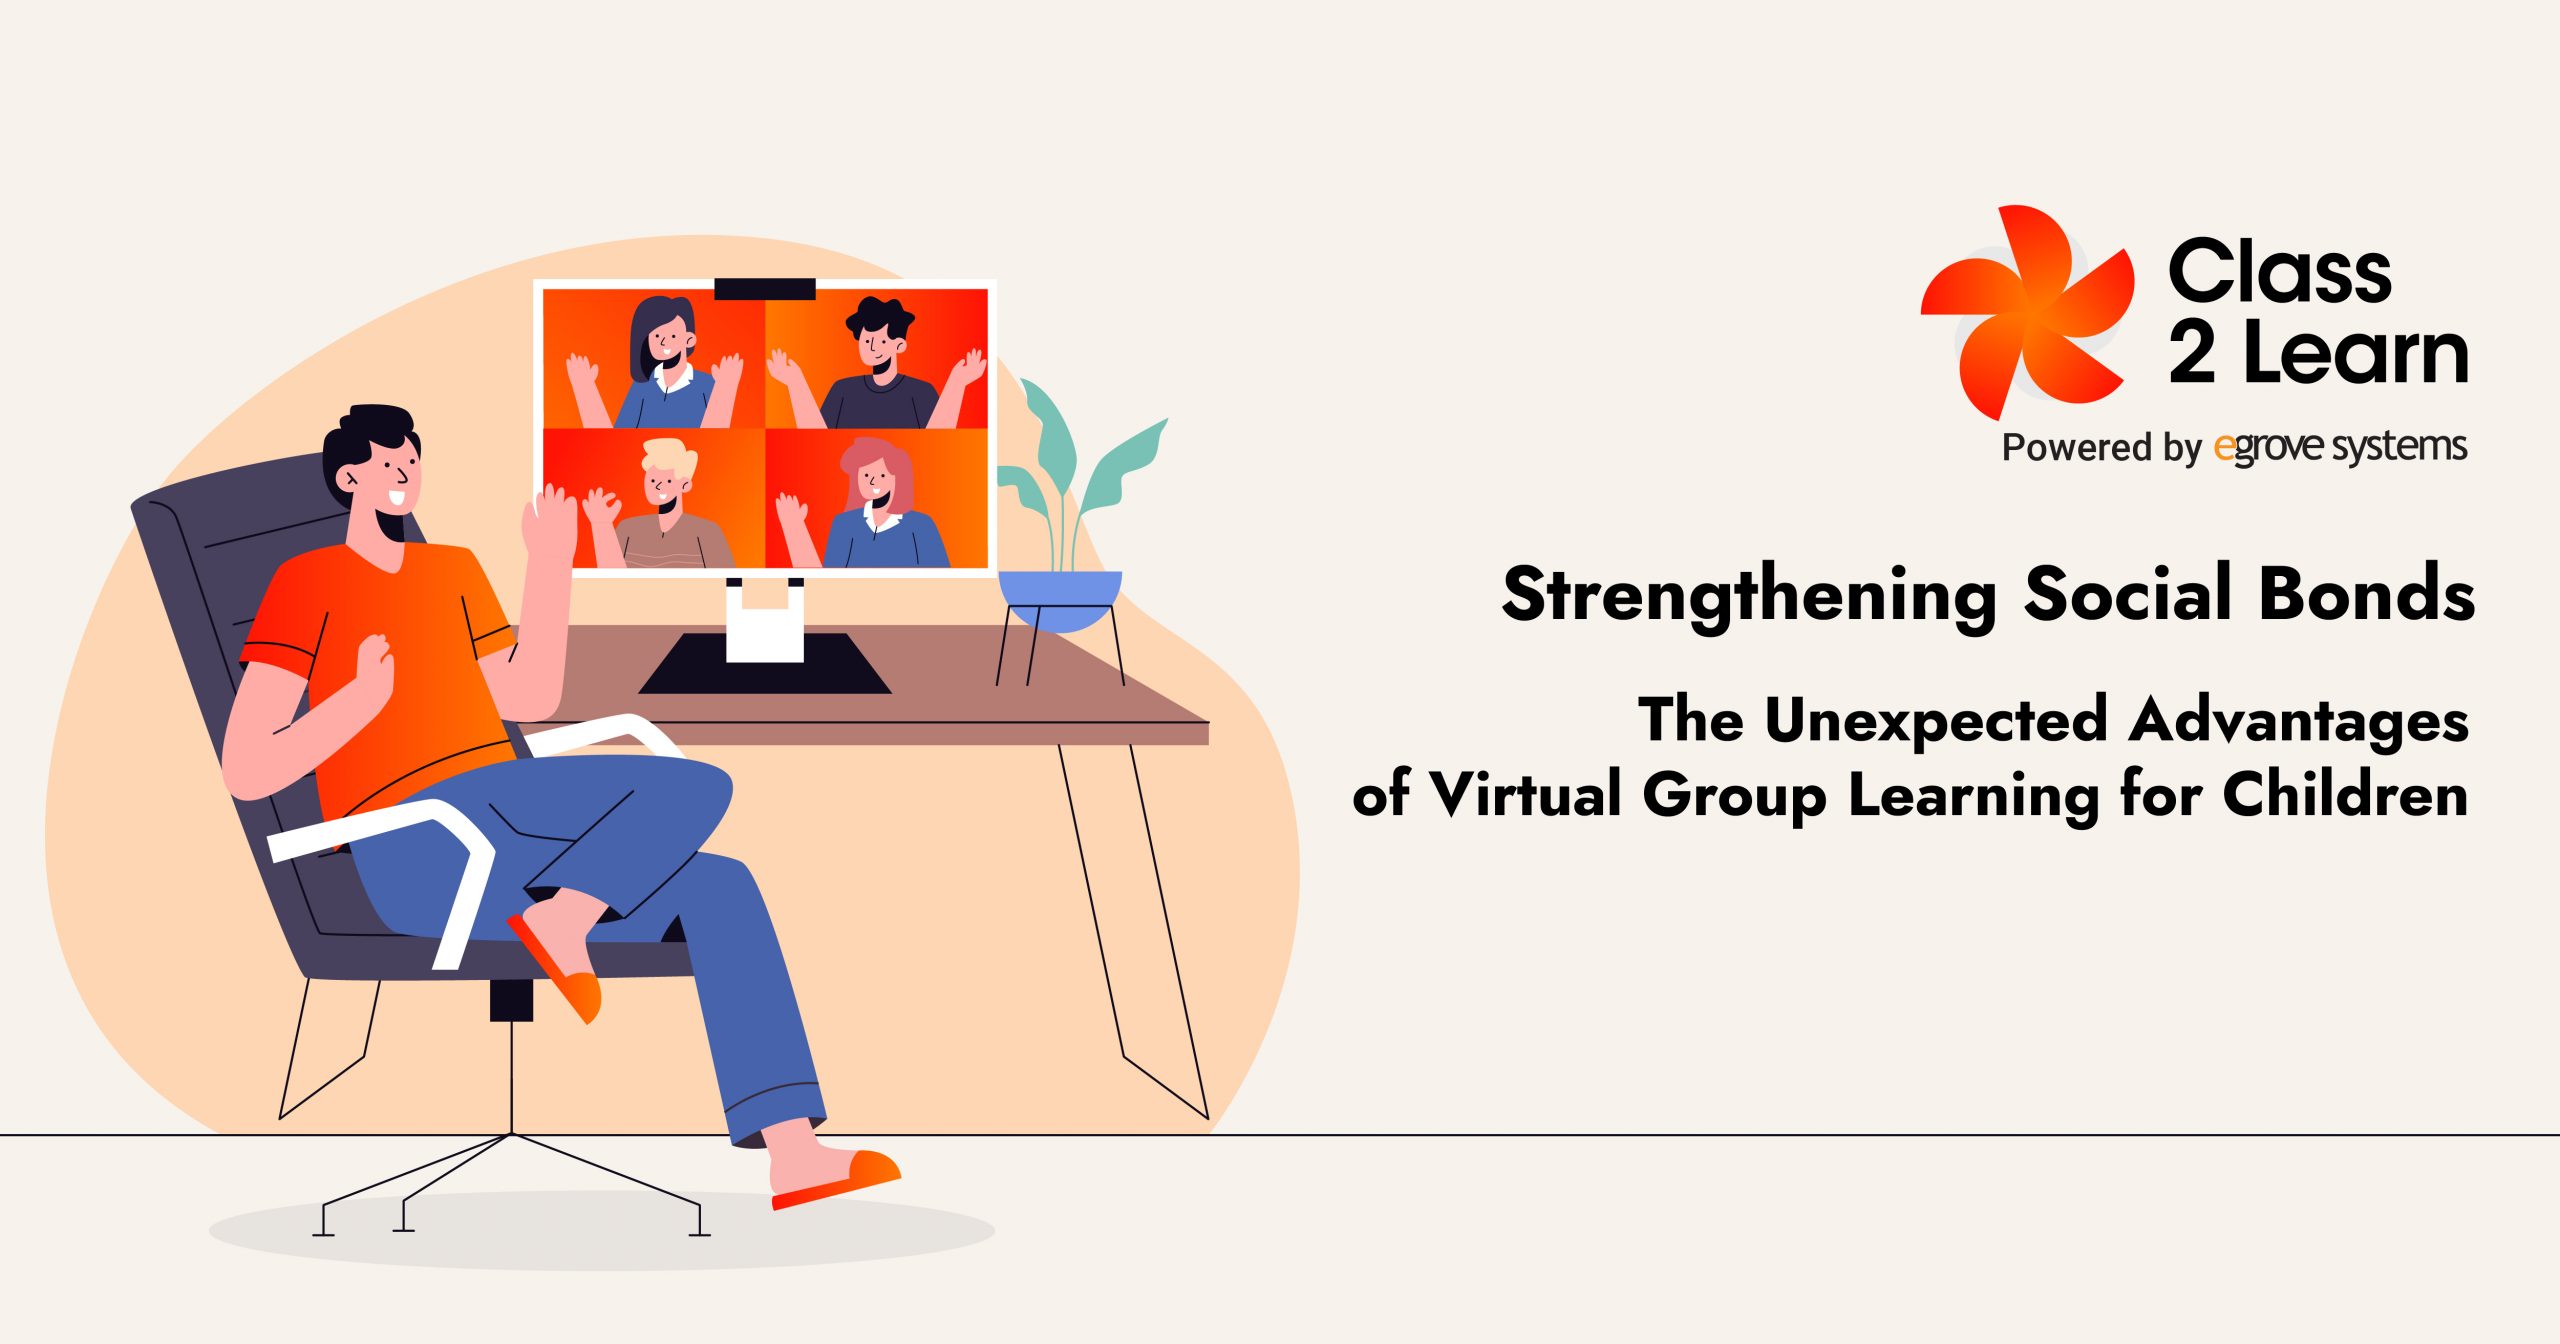 Advantages of virtual group learning for children